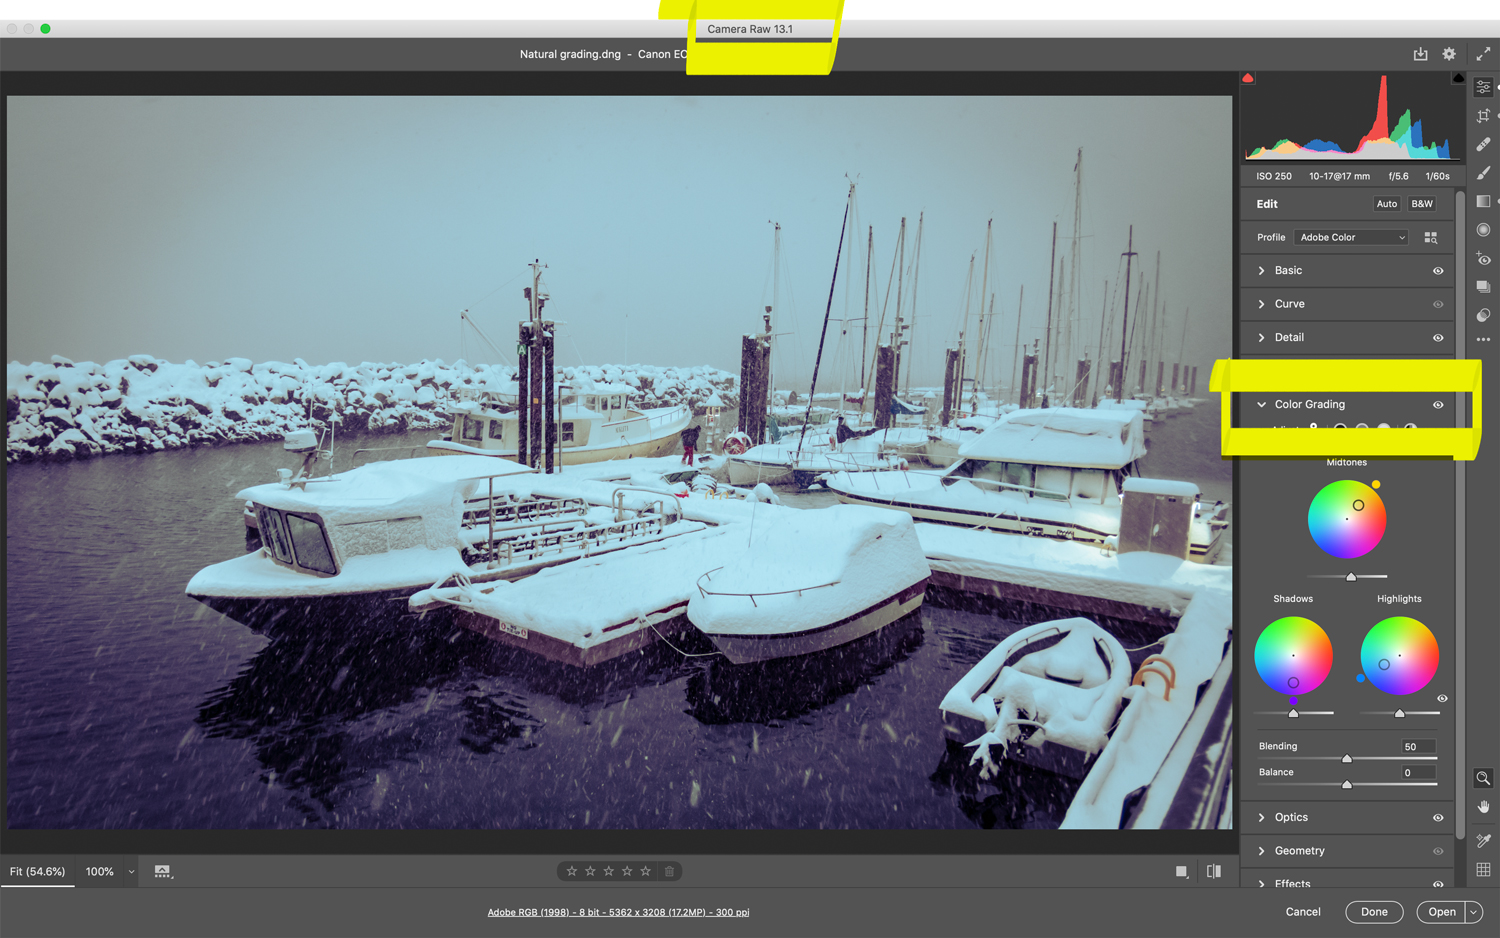 A harbor scene with snow covered boats inside the Camera Raw interface